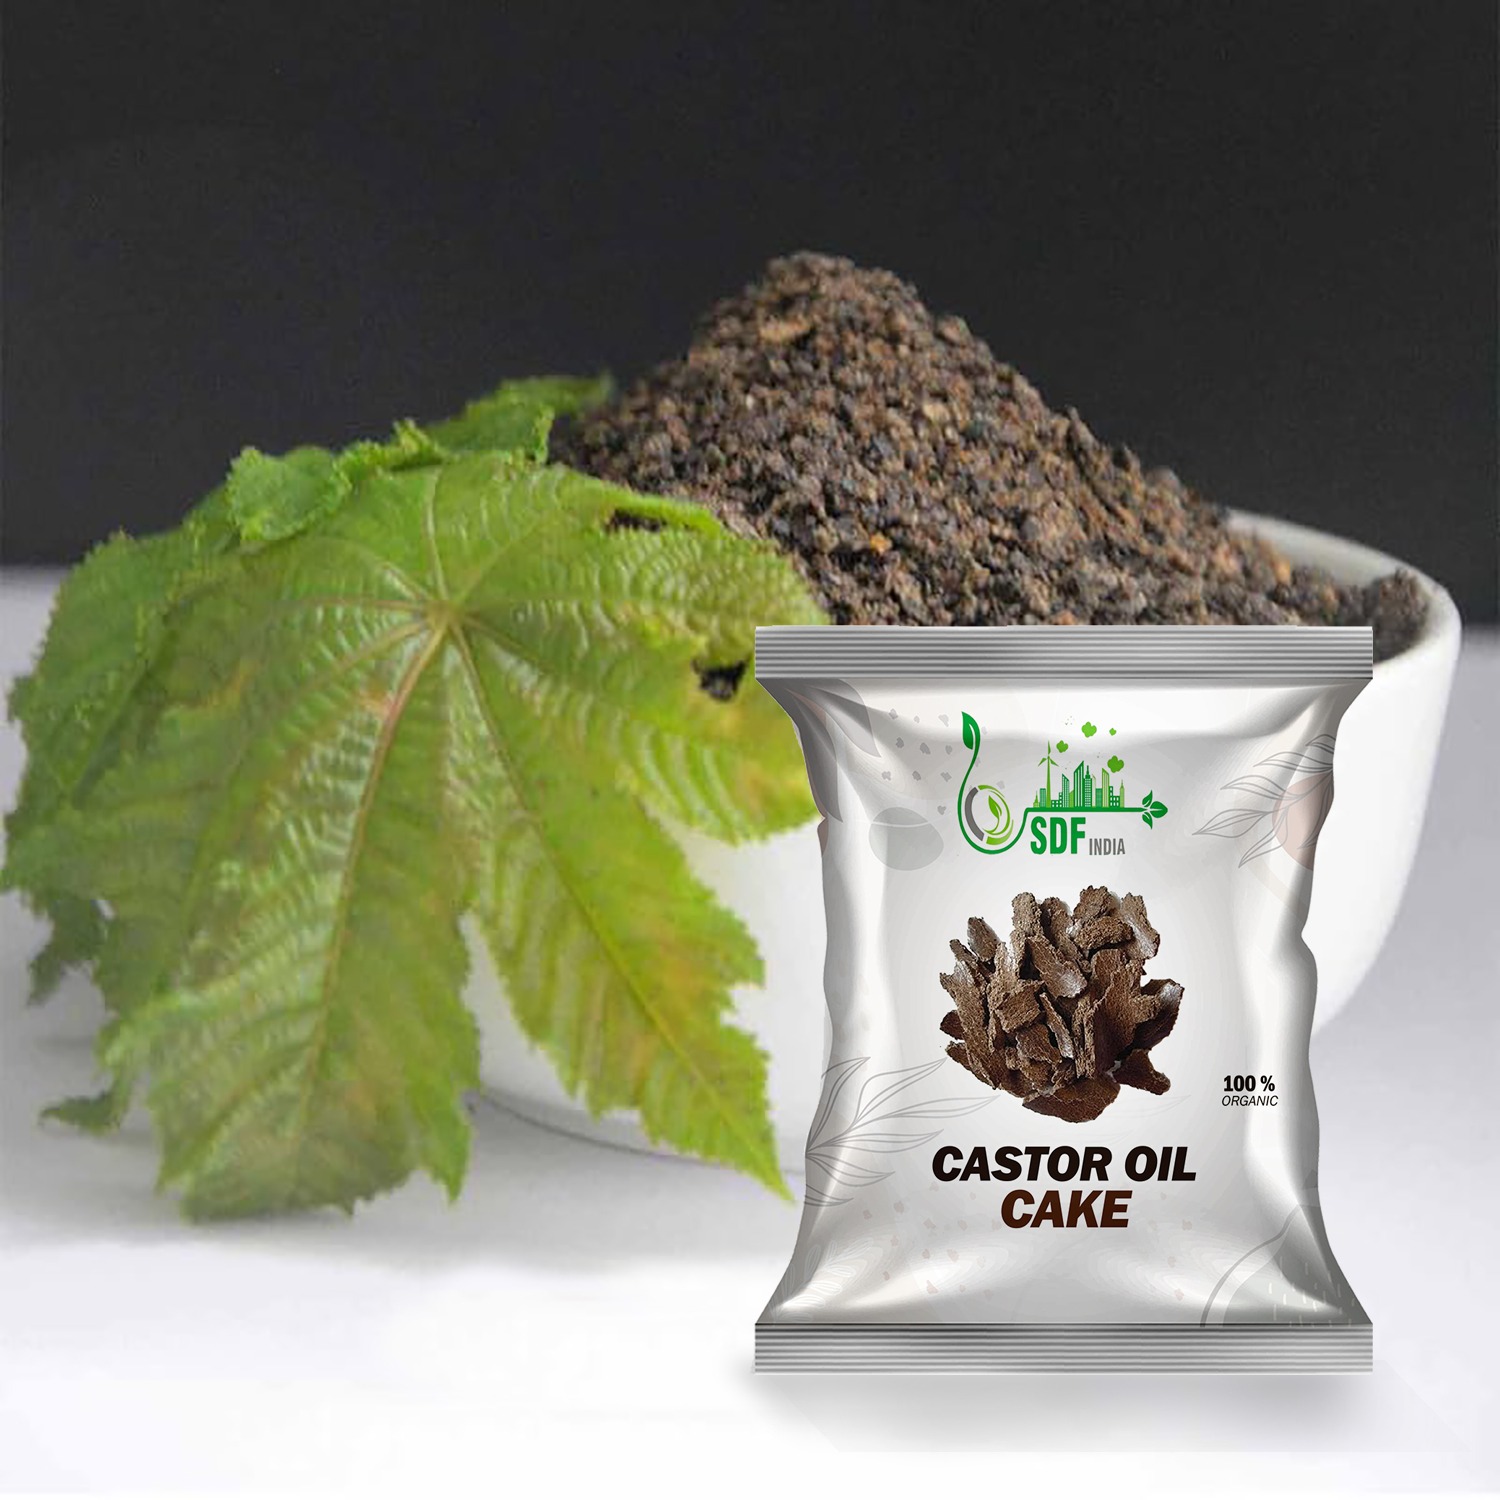 Bhu Labh Castor Cake Application: Organic Fertilizer at Best Price in Pune  | Vedant Agrotech